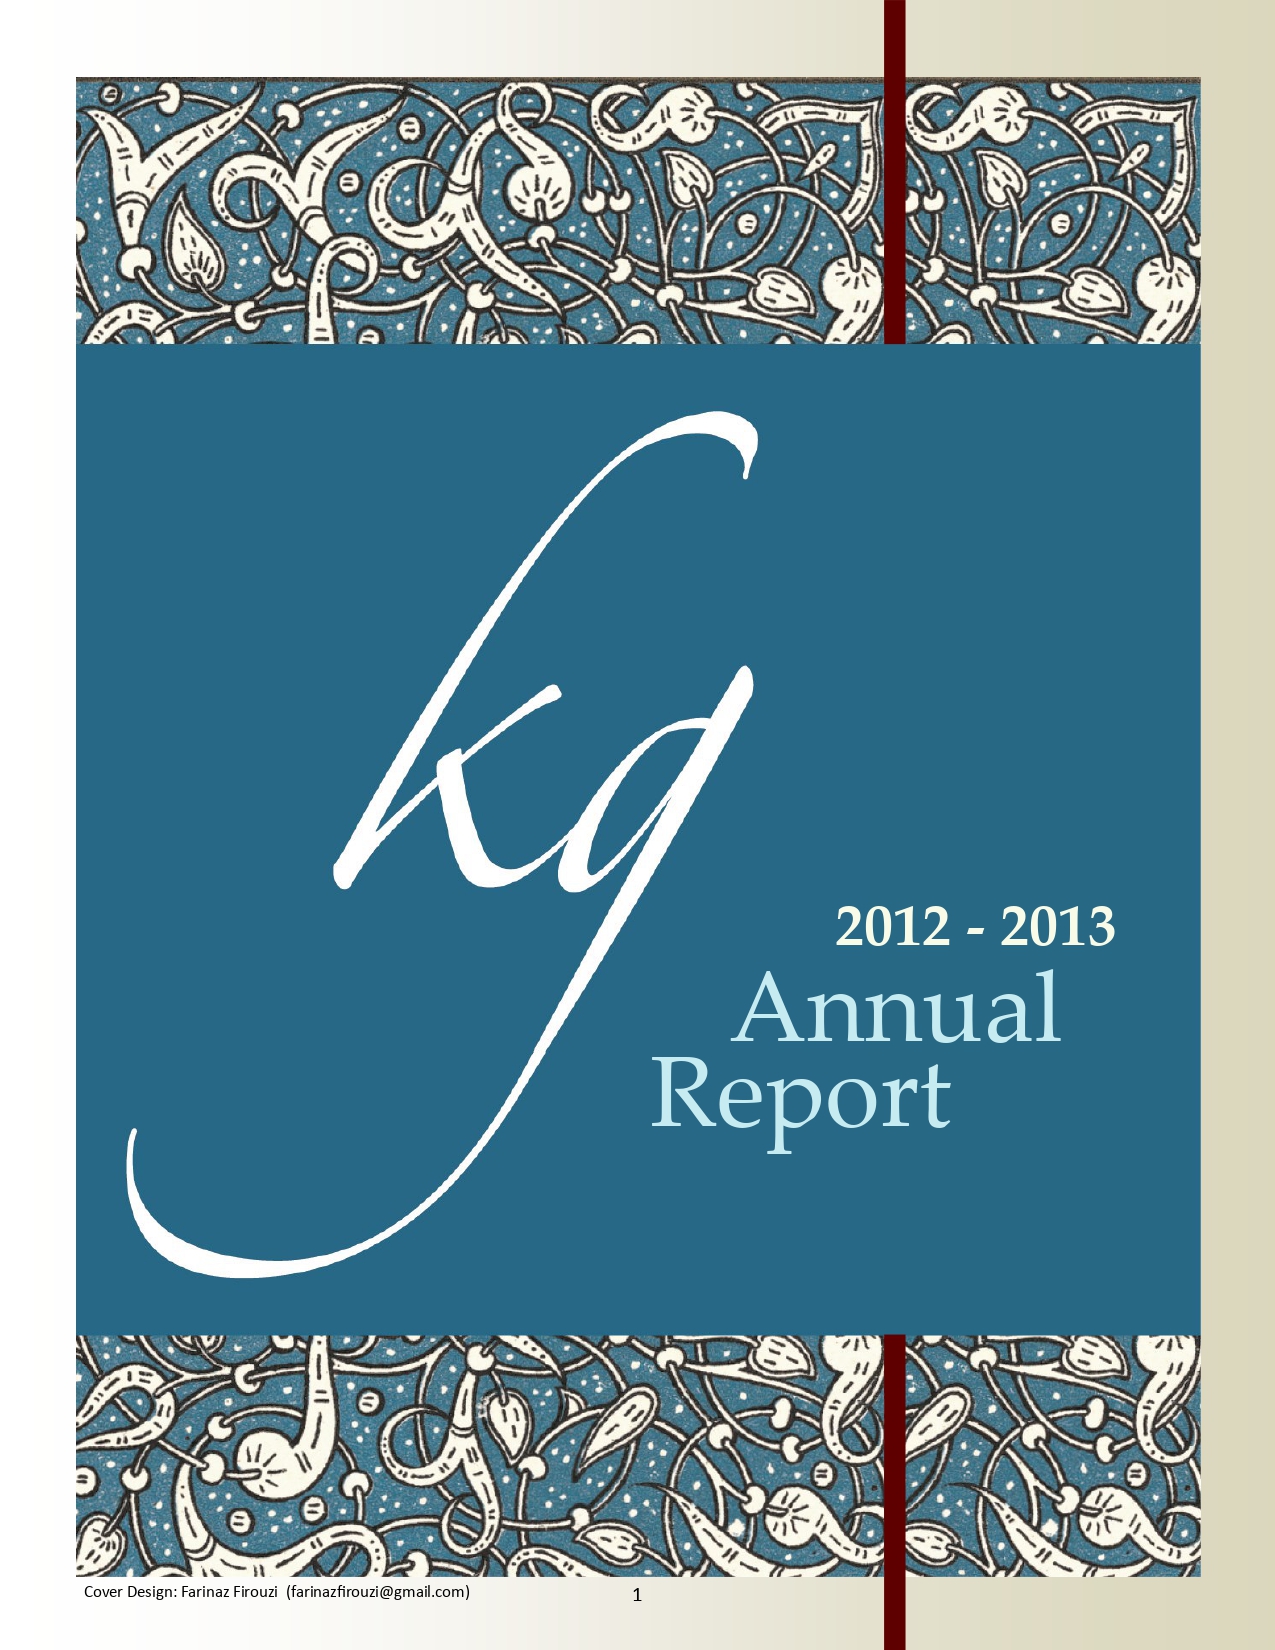 Annual Report on the Activities of The George and Lisa Zakhem Kahlil Gibran Chair for Values and Peace, The University of Maryland, 2012-2013.